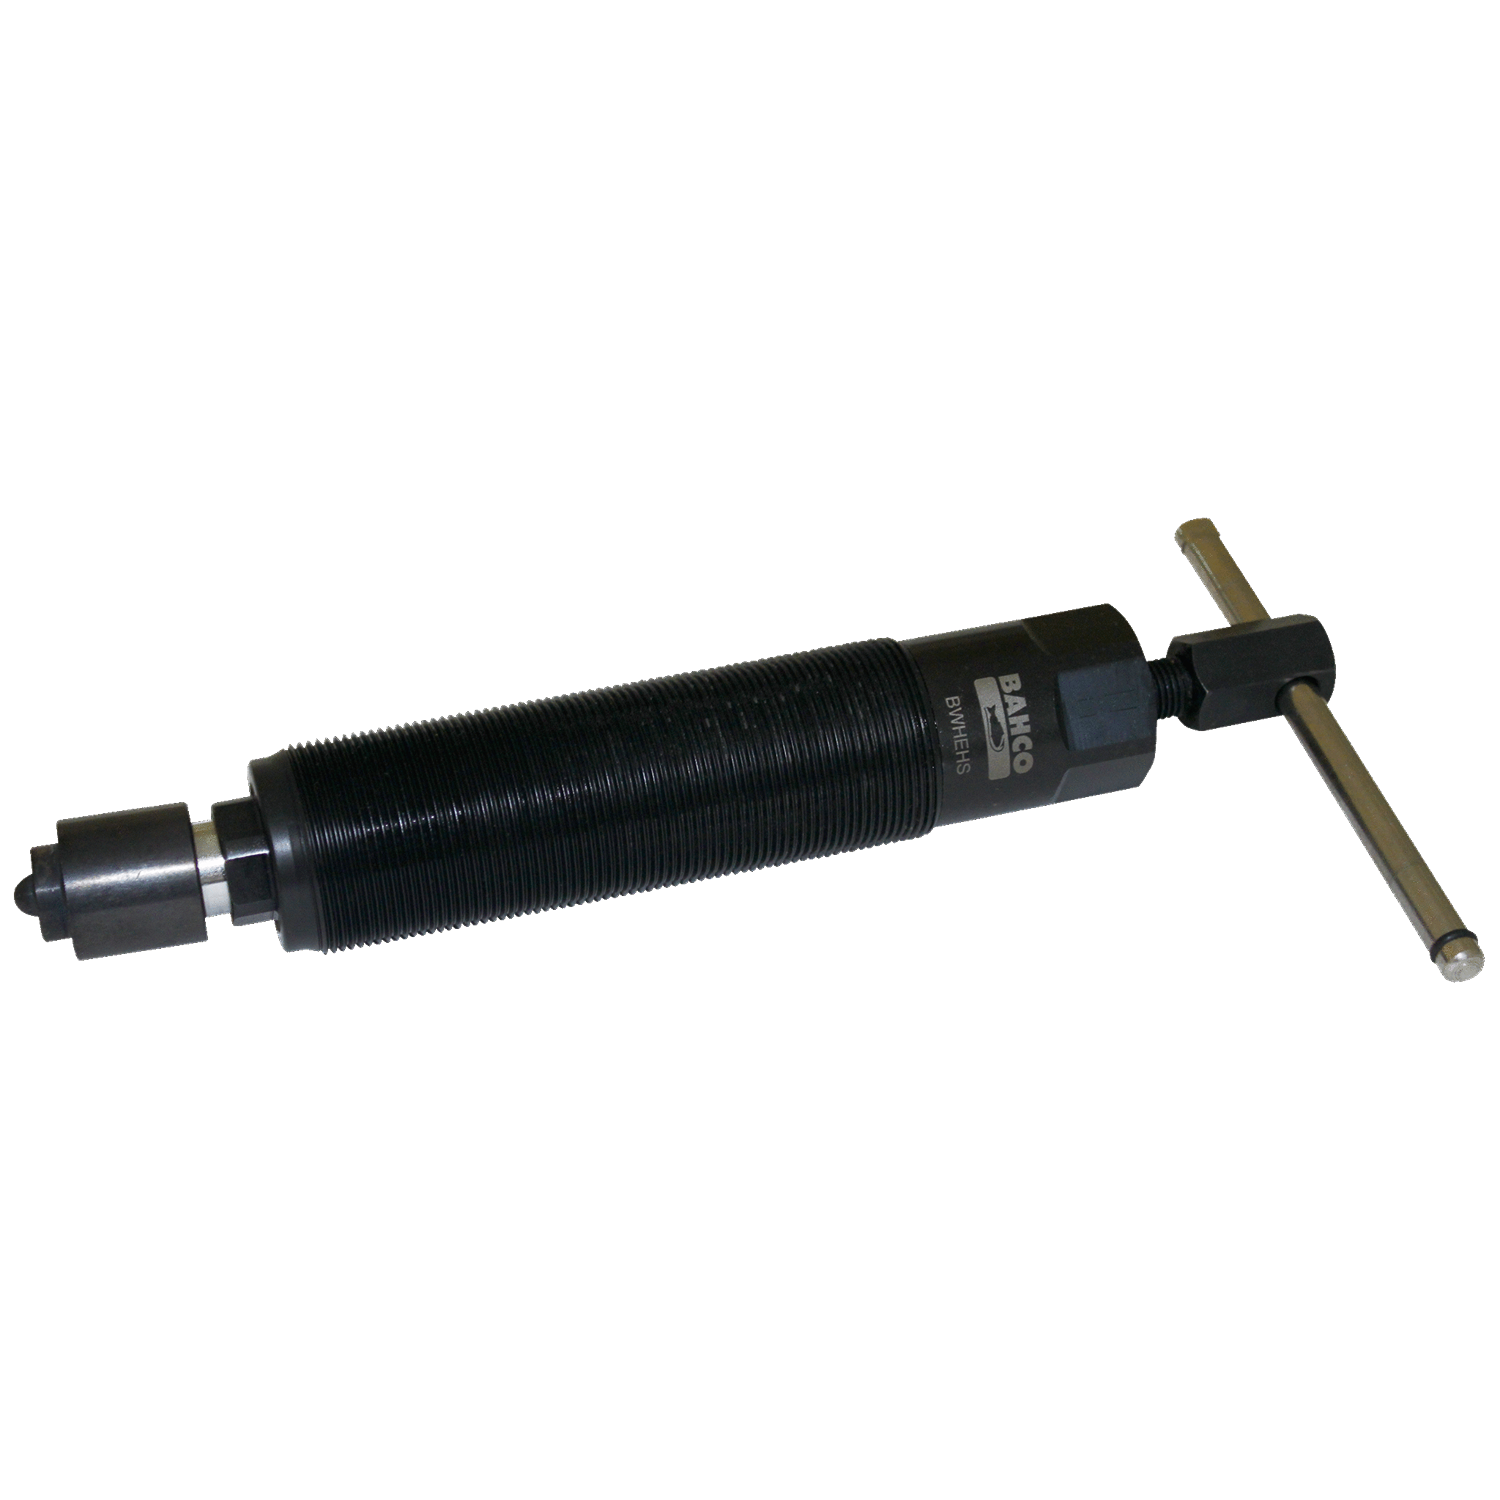 BAHCO BWHEHS 12 T Hydraulic Spindle (BAHCO Tools) - Premium Hydraulic Spindle from BAHCO - Shop now at Yew Aik.